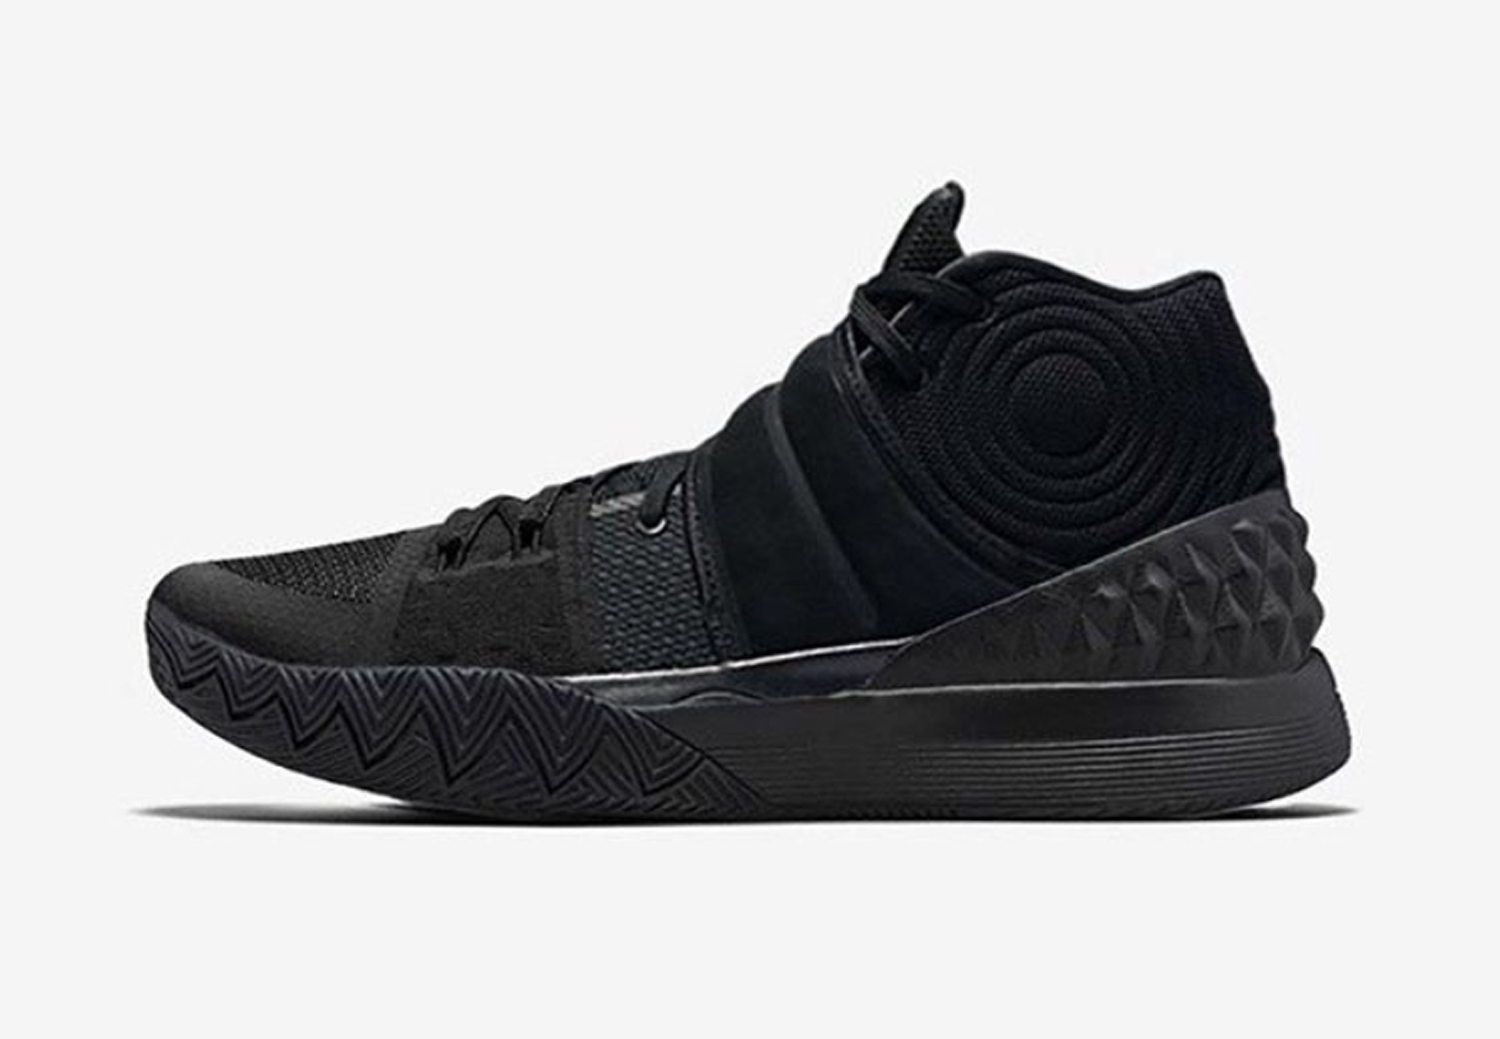 The Nike Kyrie S1HYBRID May See a Release - WearTesters